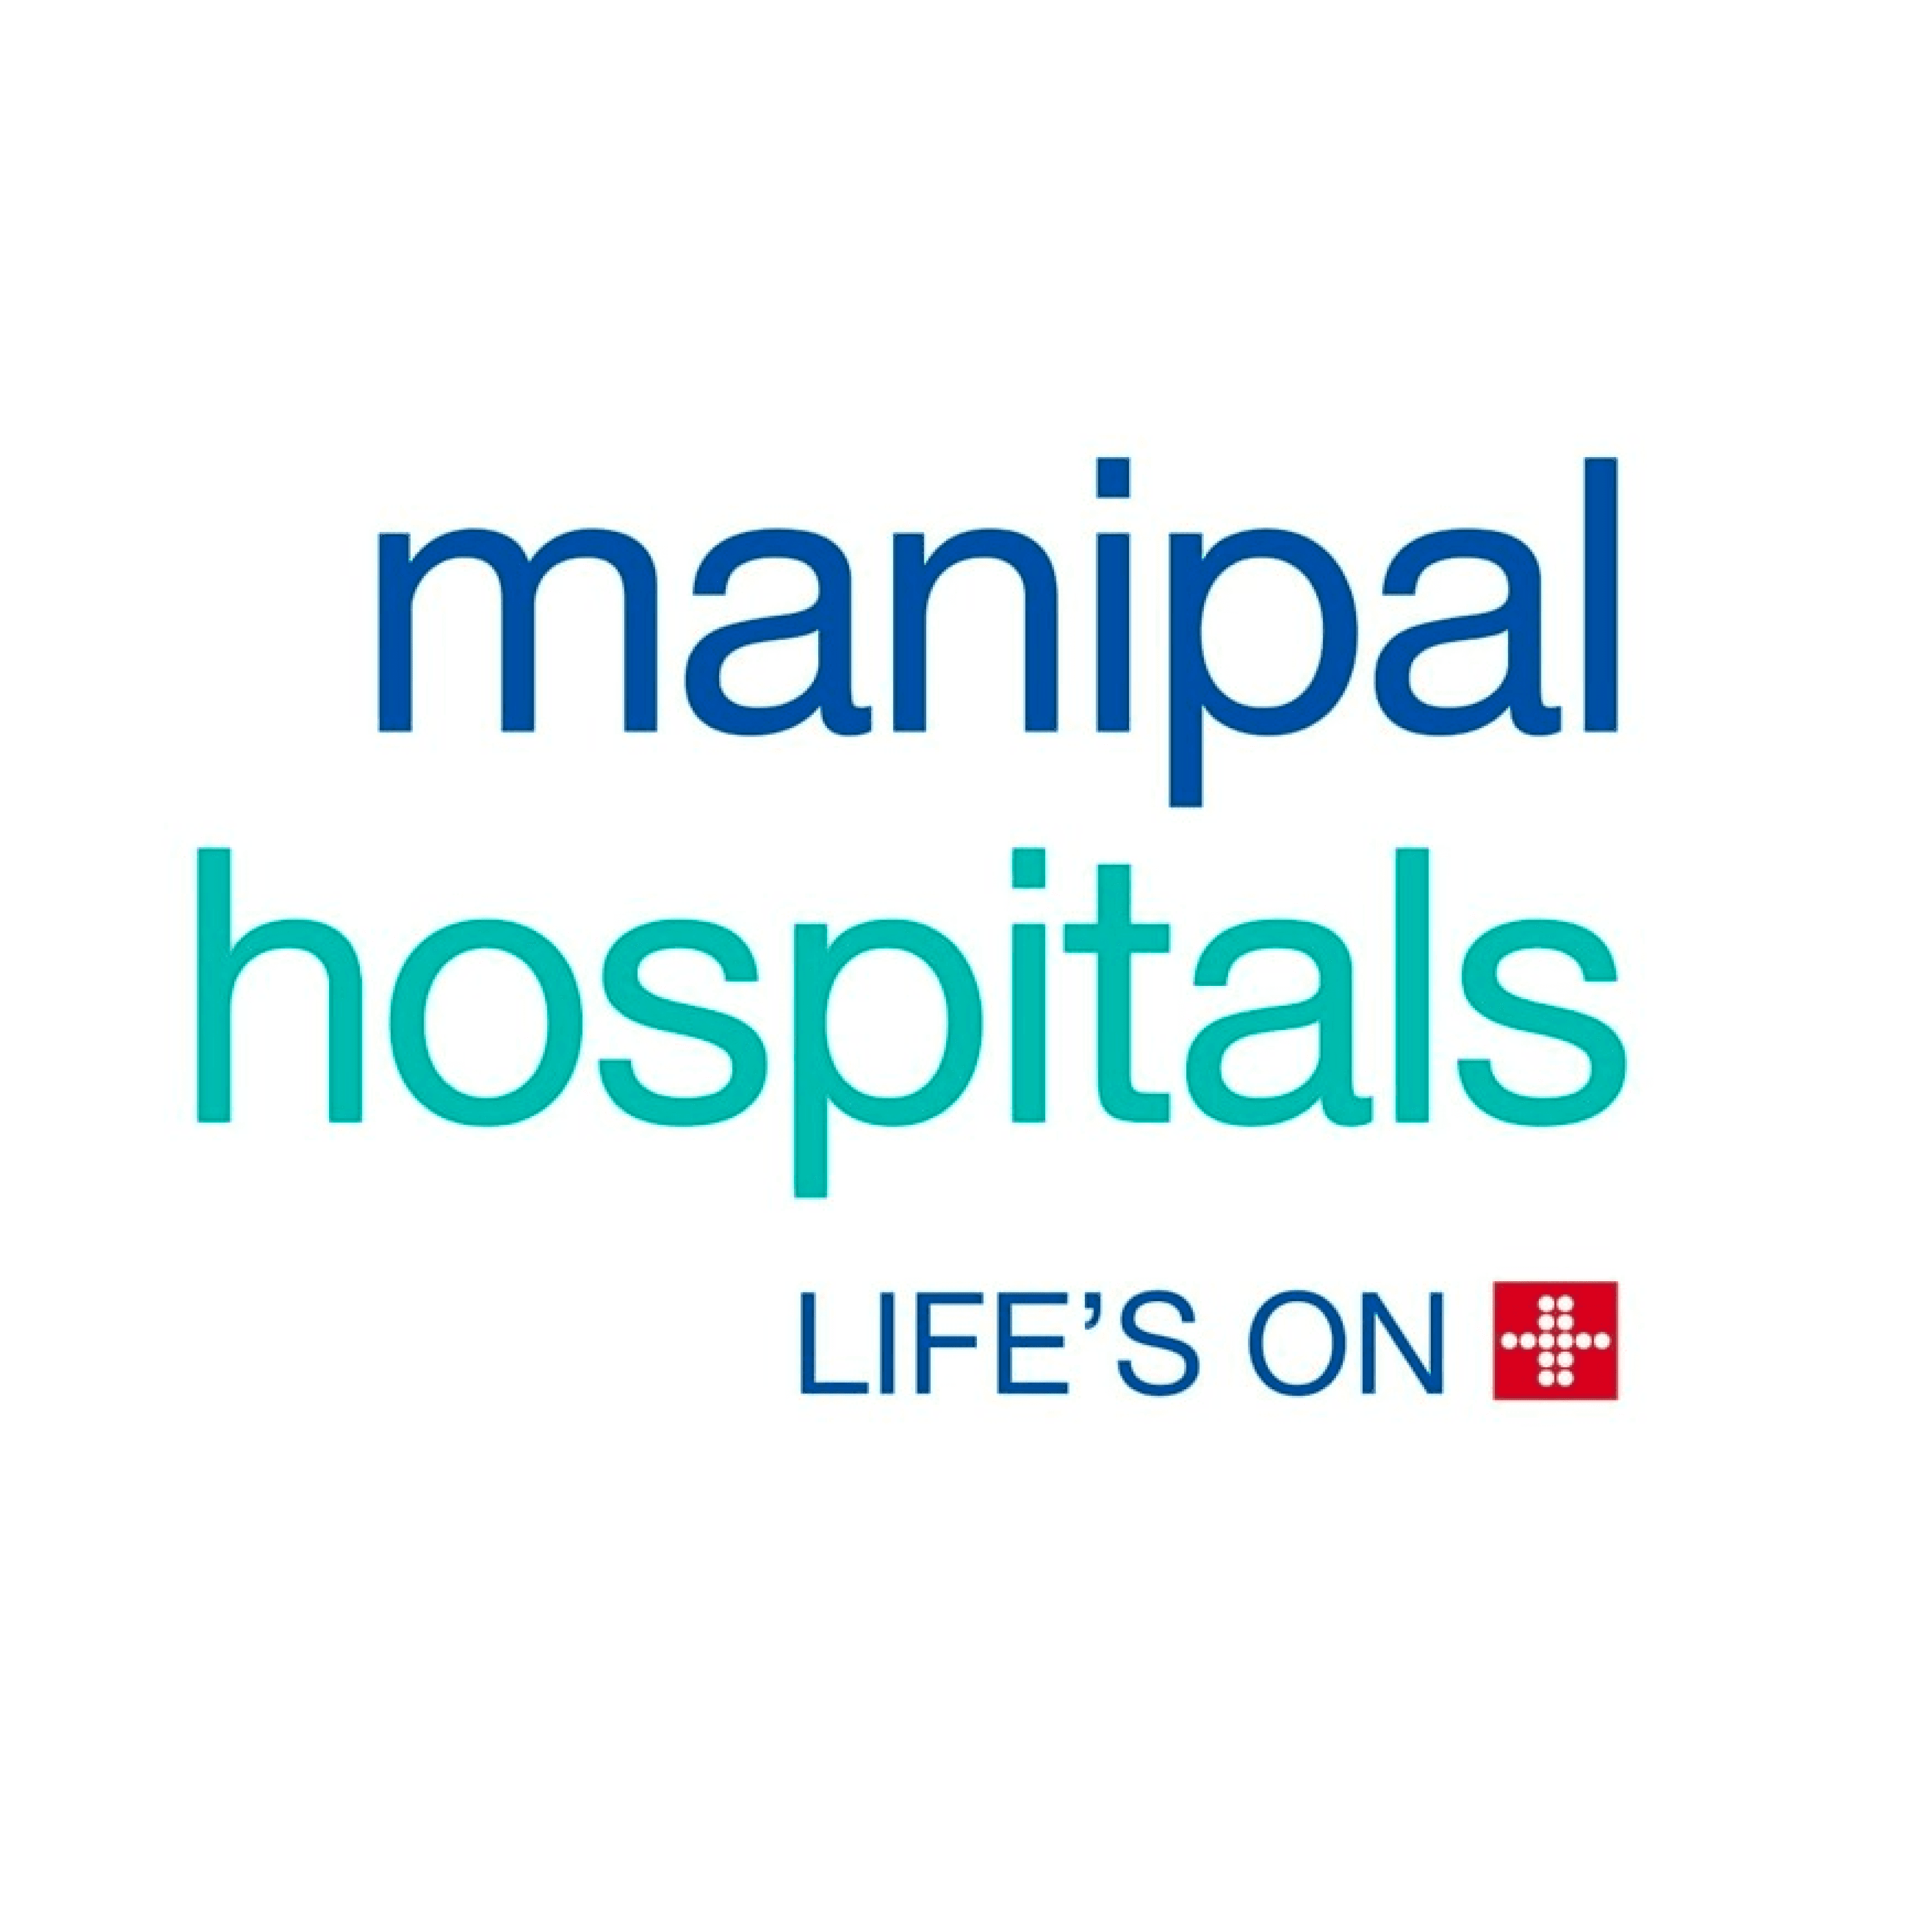 Manipal Health Enterprises Private Limited